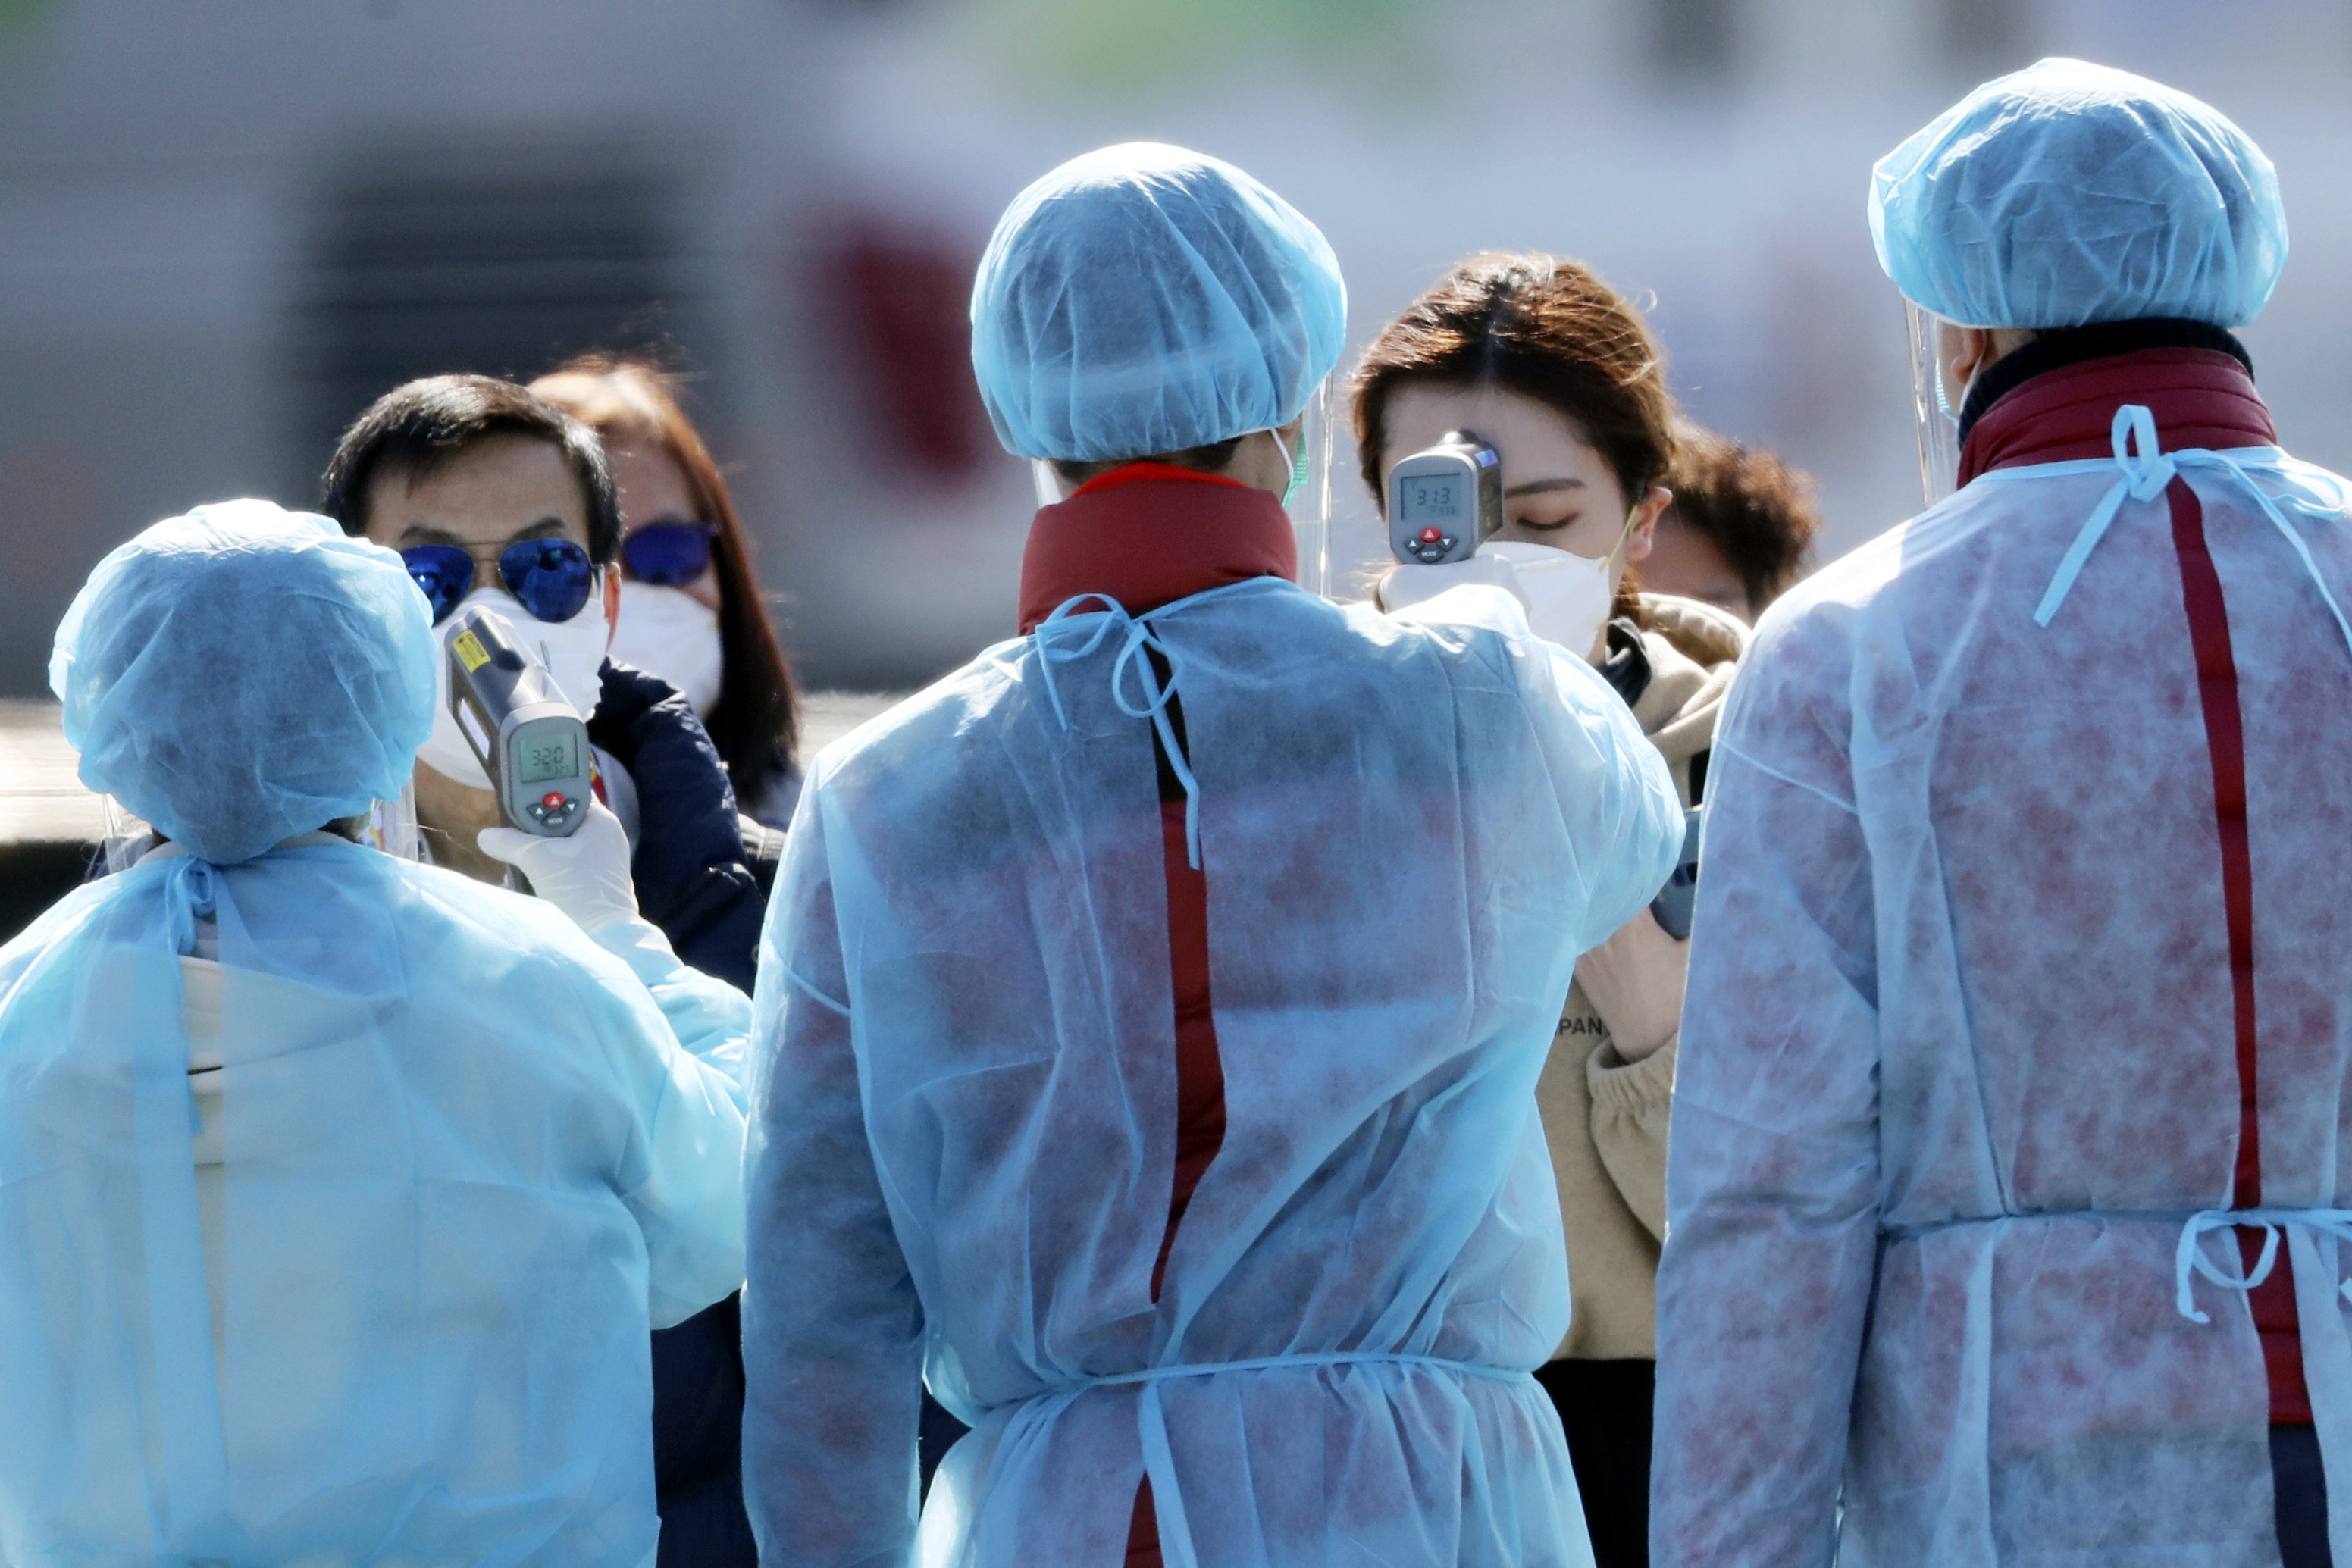 Officials in protective suits check the temperature of Diamond Princess cruise passengers before they board at a port in Yokohama, Japan, on Feb. 21, 2020. (Eugene Hoshiko—AP)